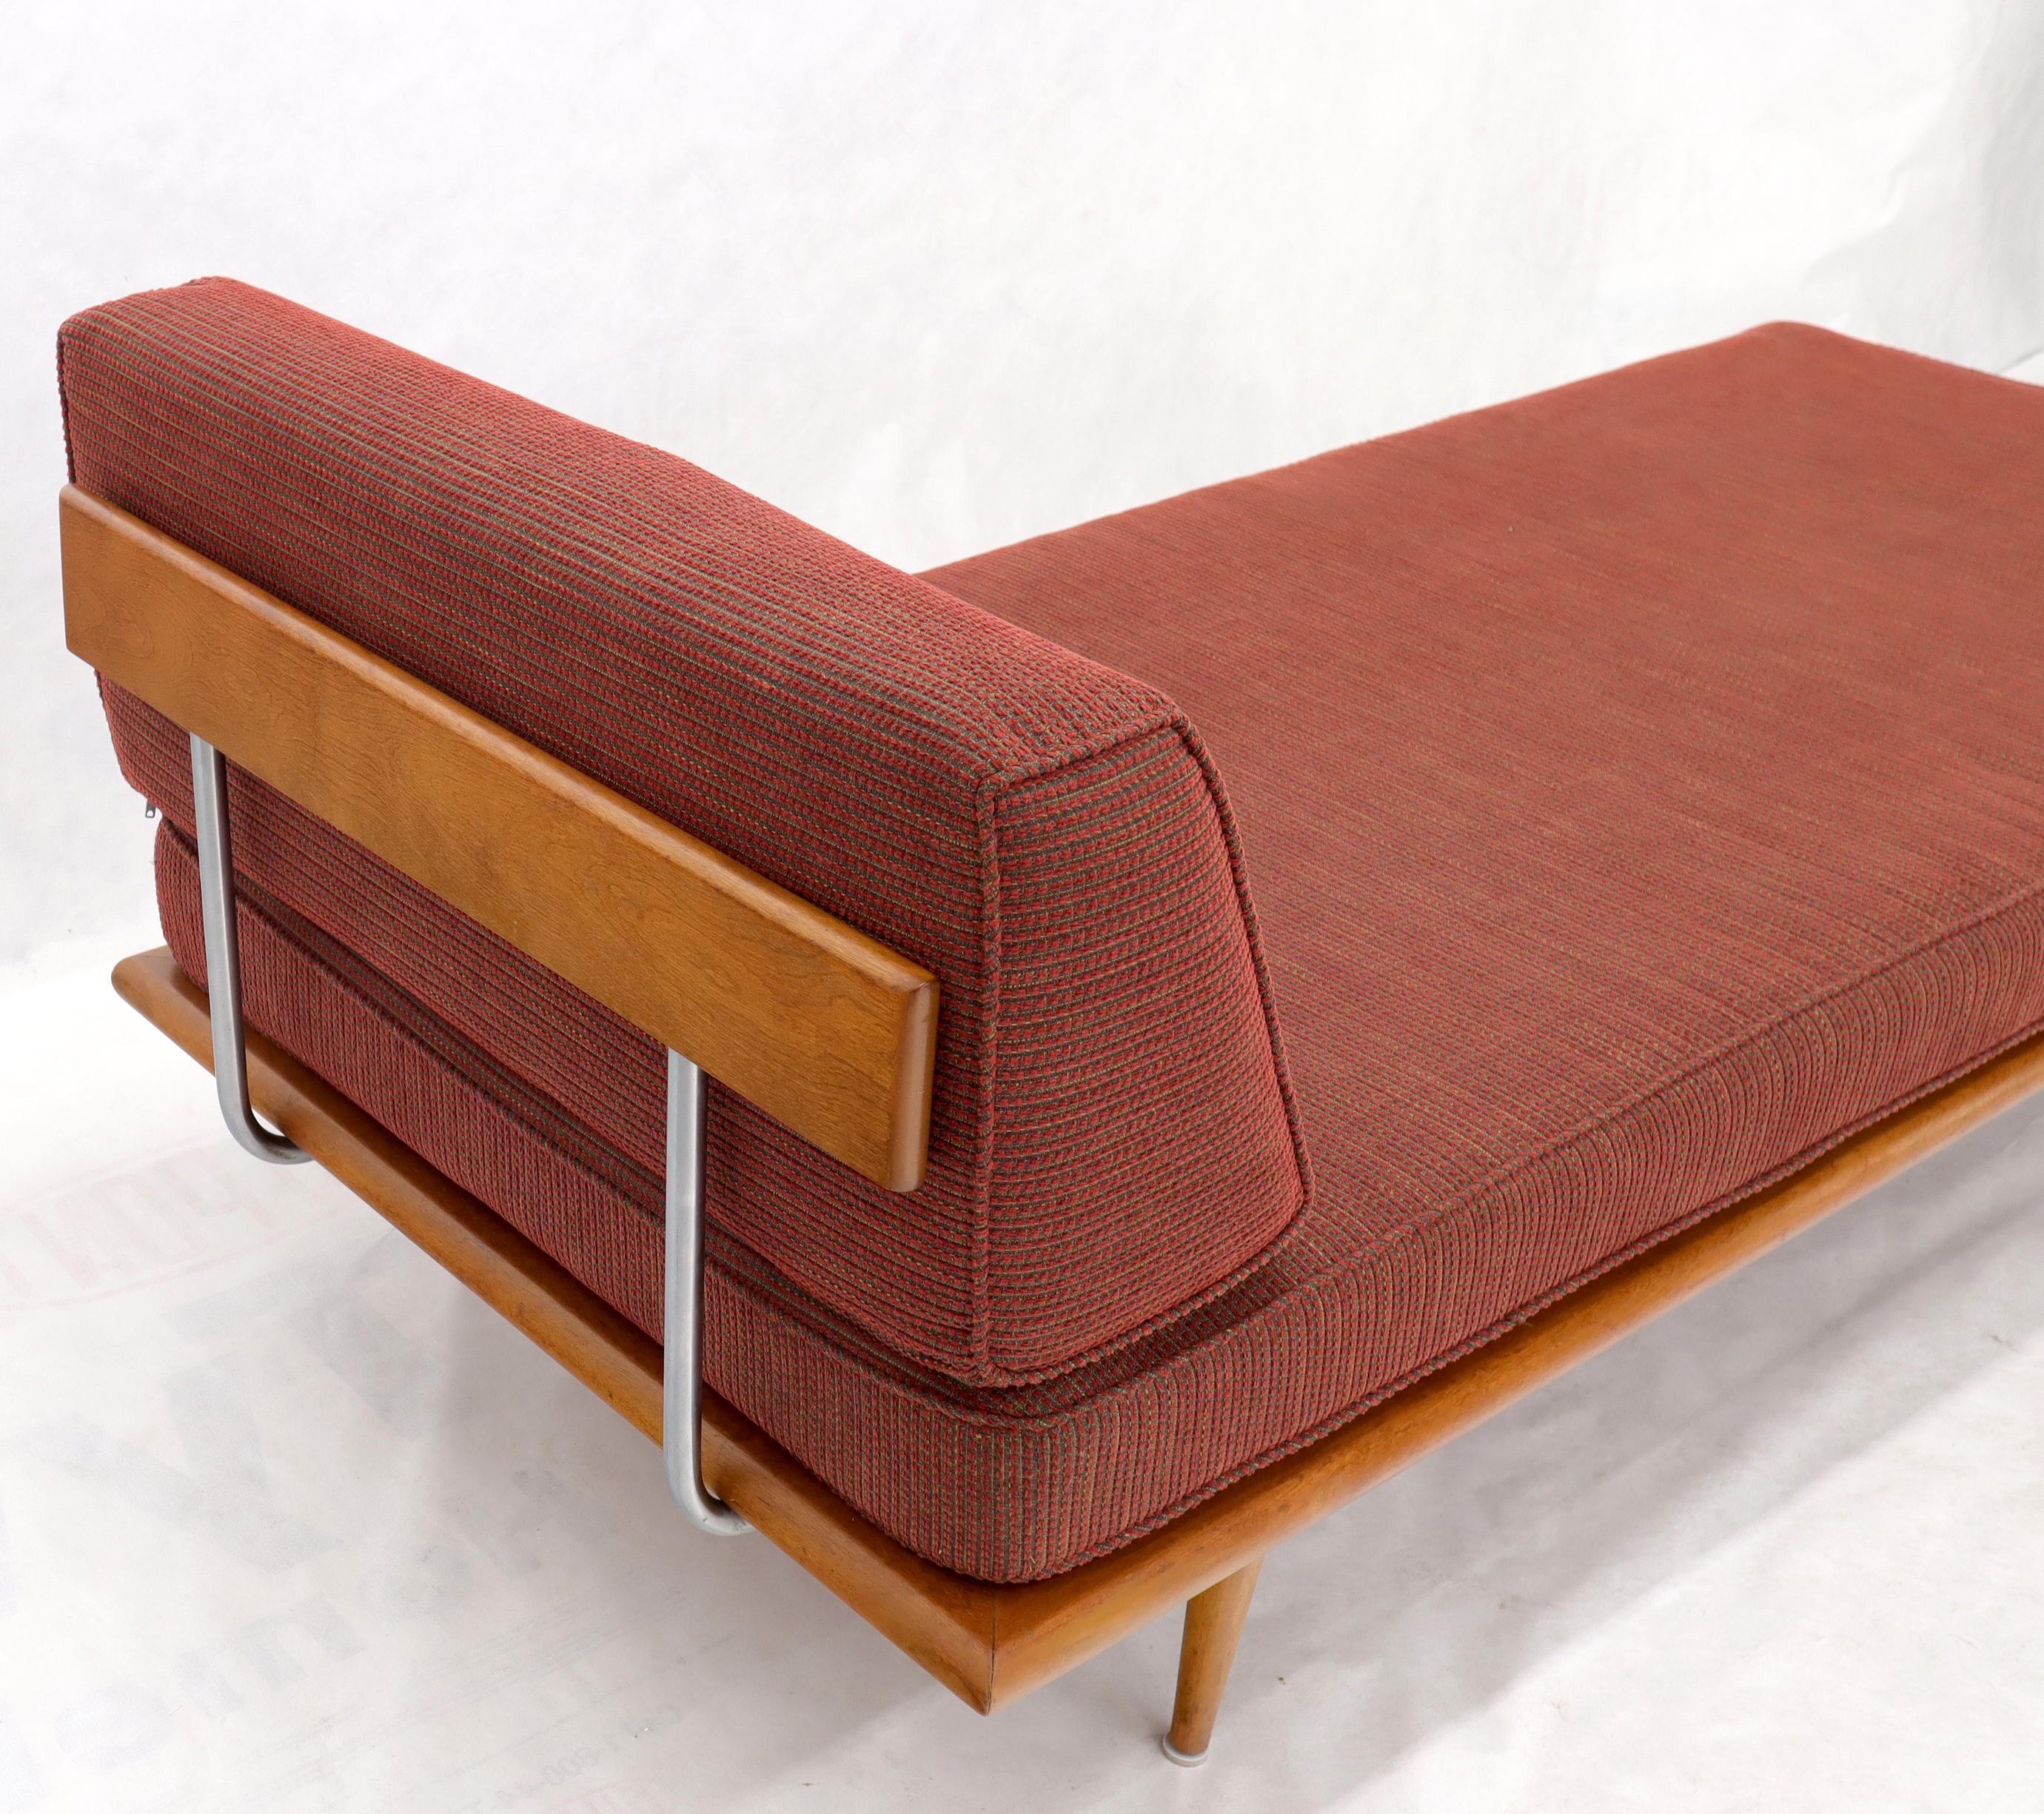 Vintage George Nelson für Herman Miller Daybed Cot Sofa Chaise Lounge 4